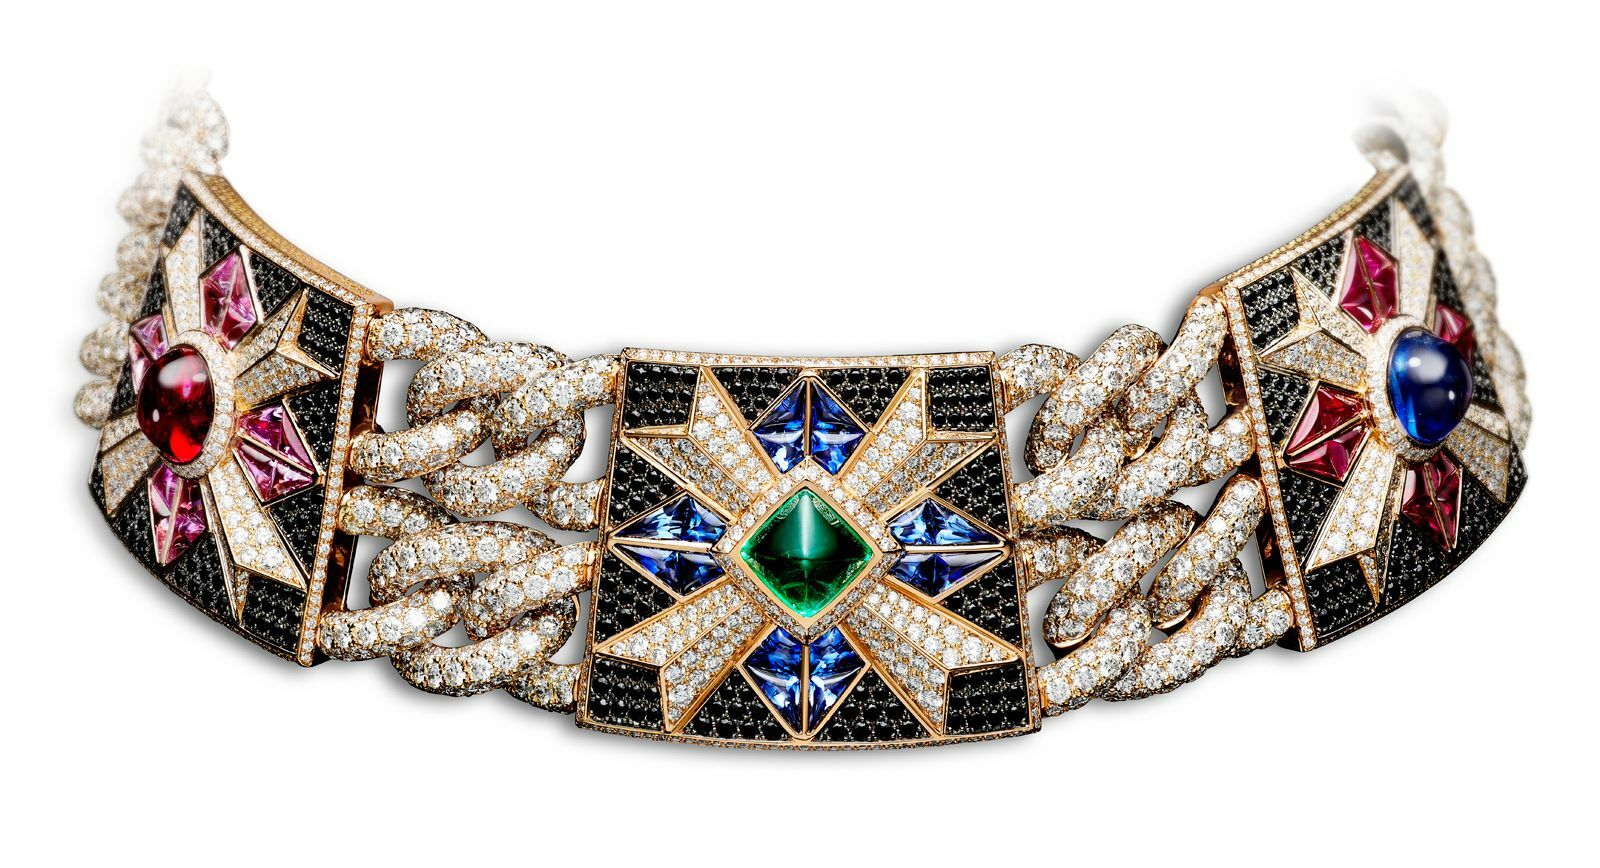 Giampiero Bodino: High Jewellery Should Be Conceived in Modern Ways